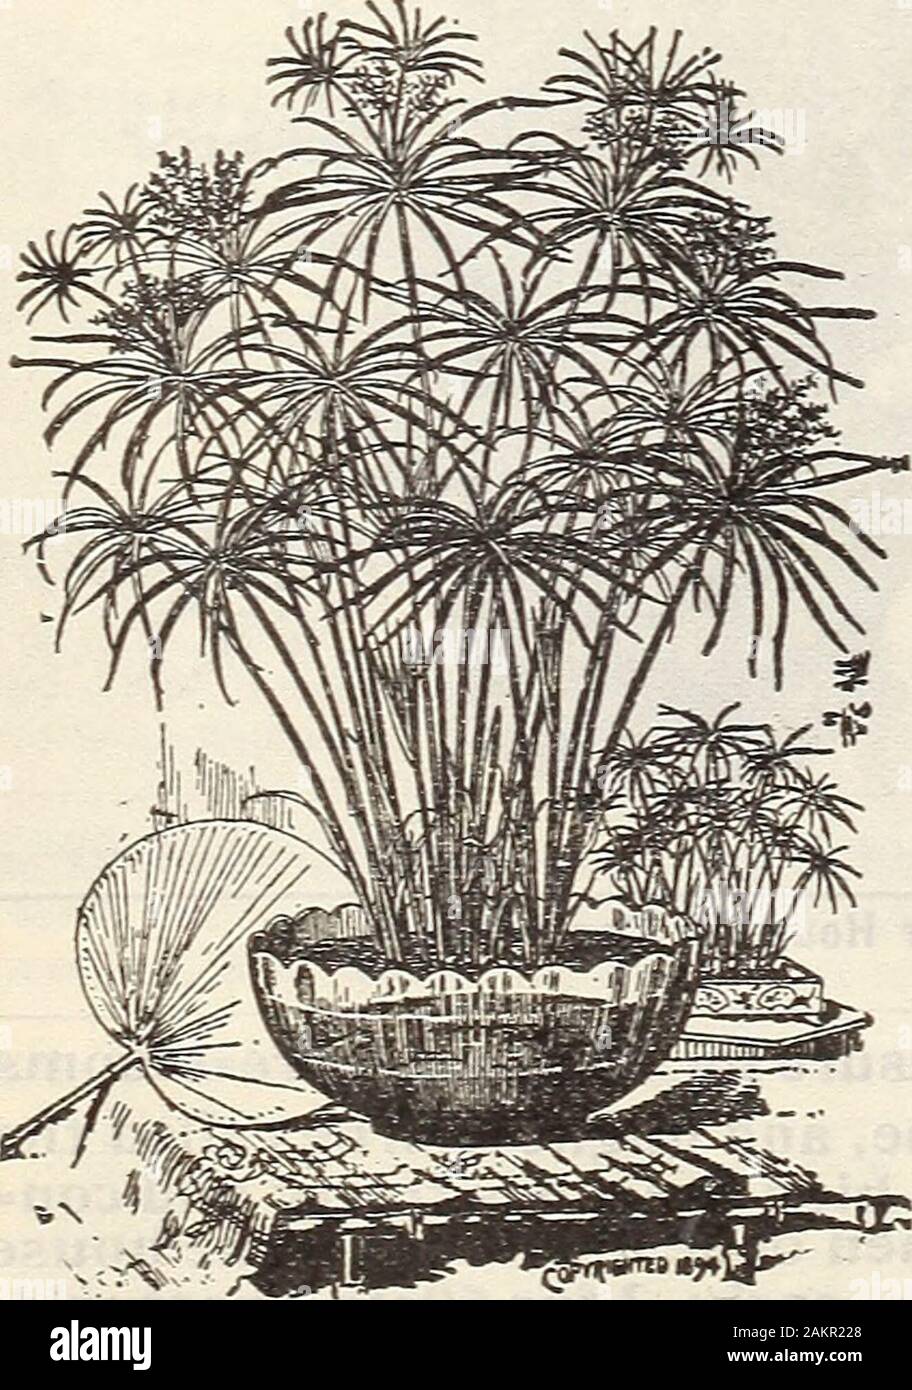 New floral guide : autumn 1906 . OSTRICH FEATHER PALV1 COCOS WEDDELLIANA. Christmas Tree Palm (Norfolk Island Pine; (Araucaria Excelsa) This is the handsomest and most beauti-ful of ail the decorative evergreens for houseculture. It has no equal, but is not oftenseen, because rare and expensive, but we arenow offering nice plants at the followingreasonable prices. Fine sturdy little Trees,8 to 10 inches high, 2 to 3 tiers of branches,from 4 inch pots, 75 cts. each, postpaid.Larger and heavier trees, $1.00, $L50 andS2.00 each, by express. Stock Photo